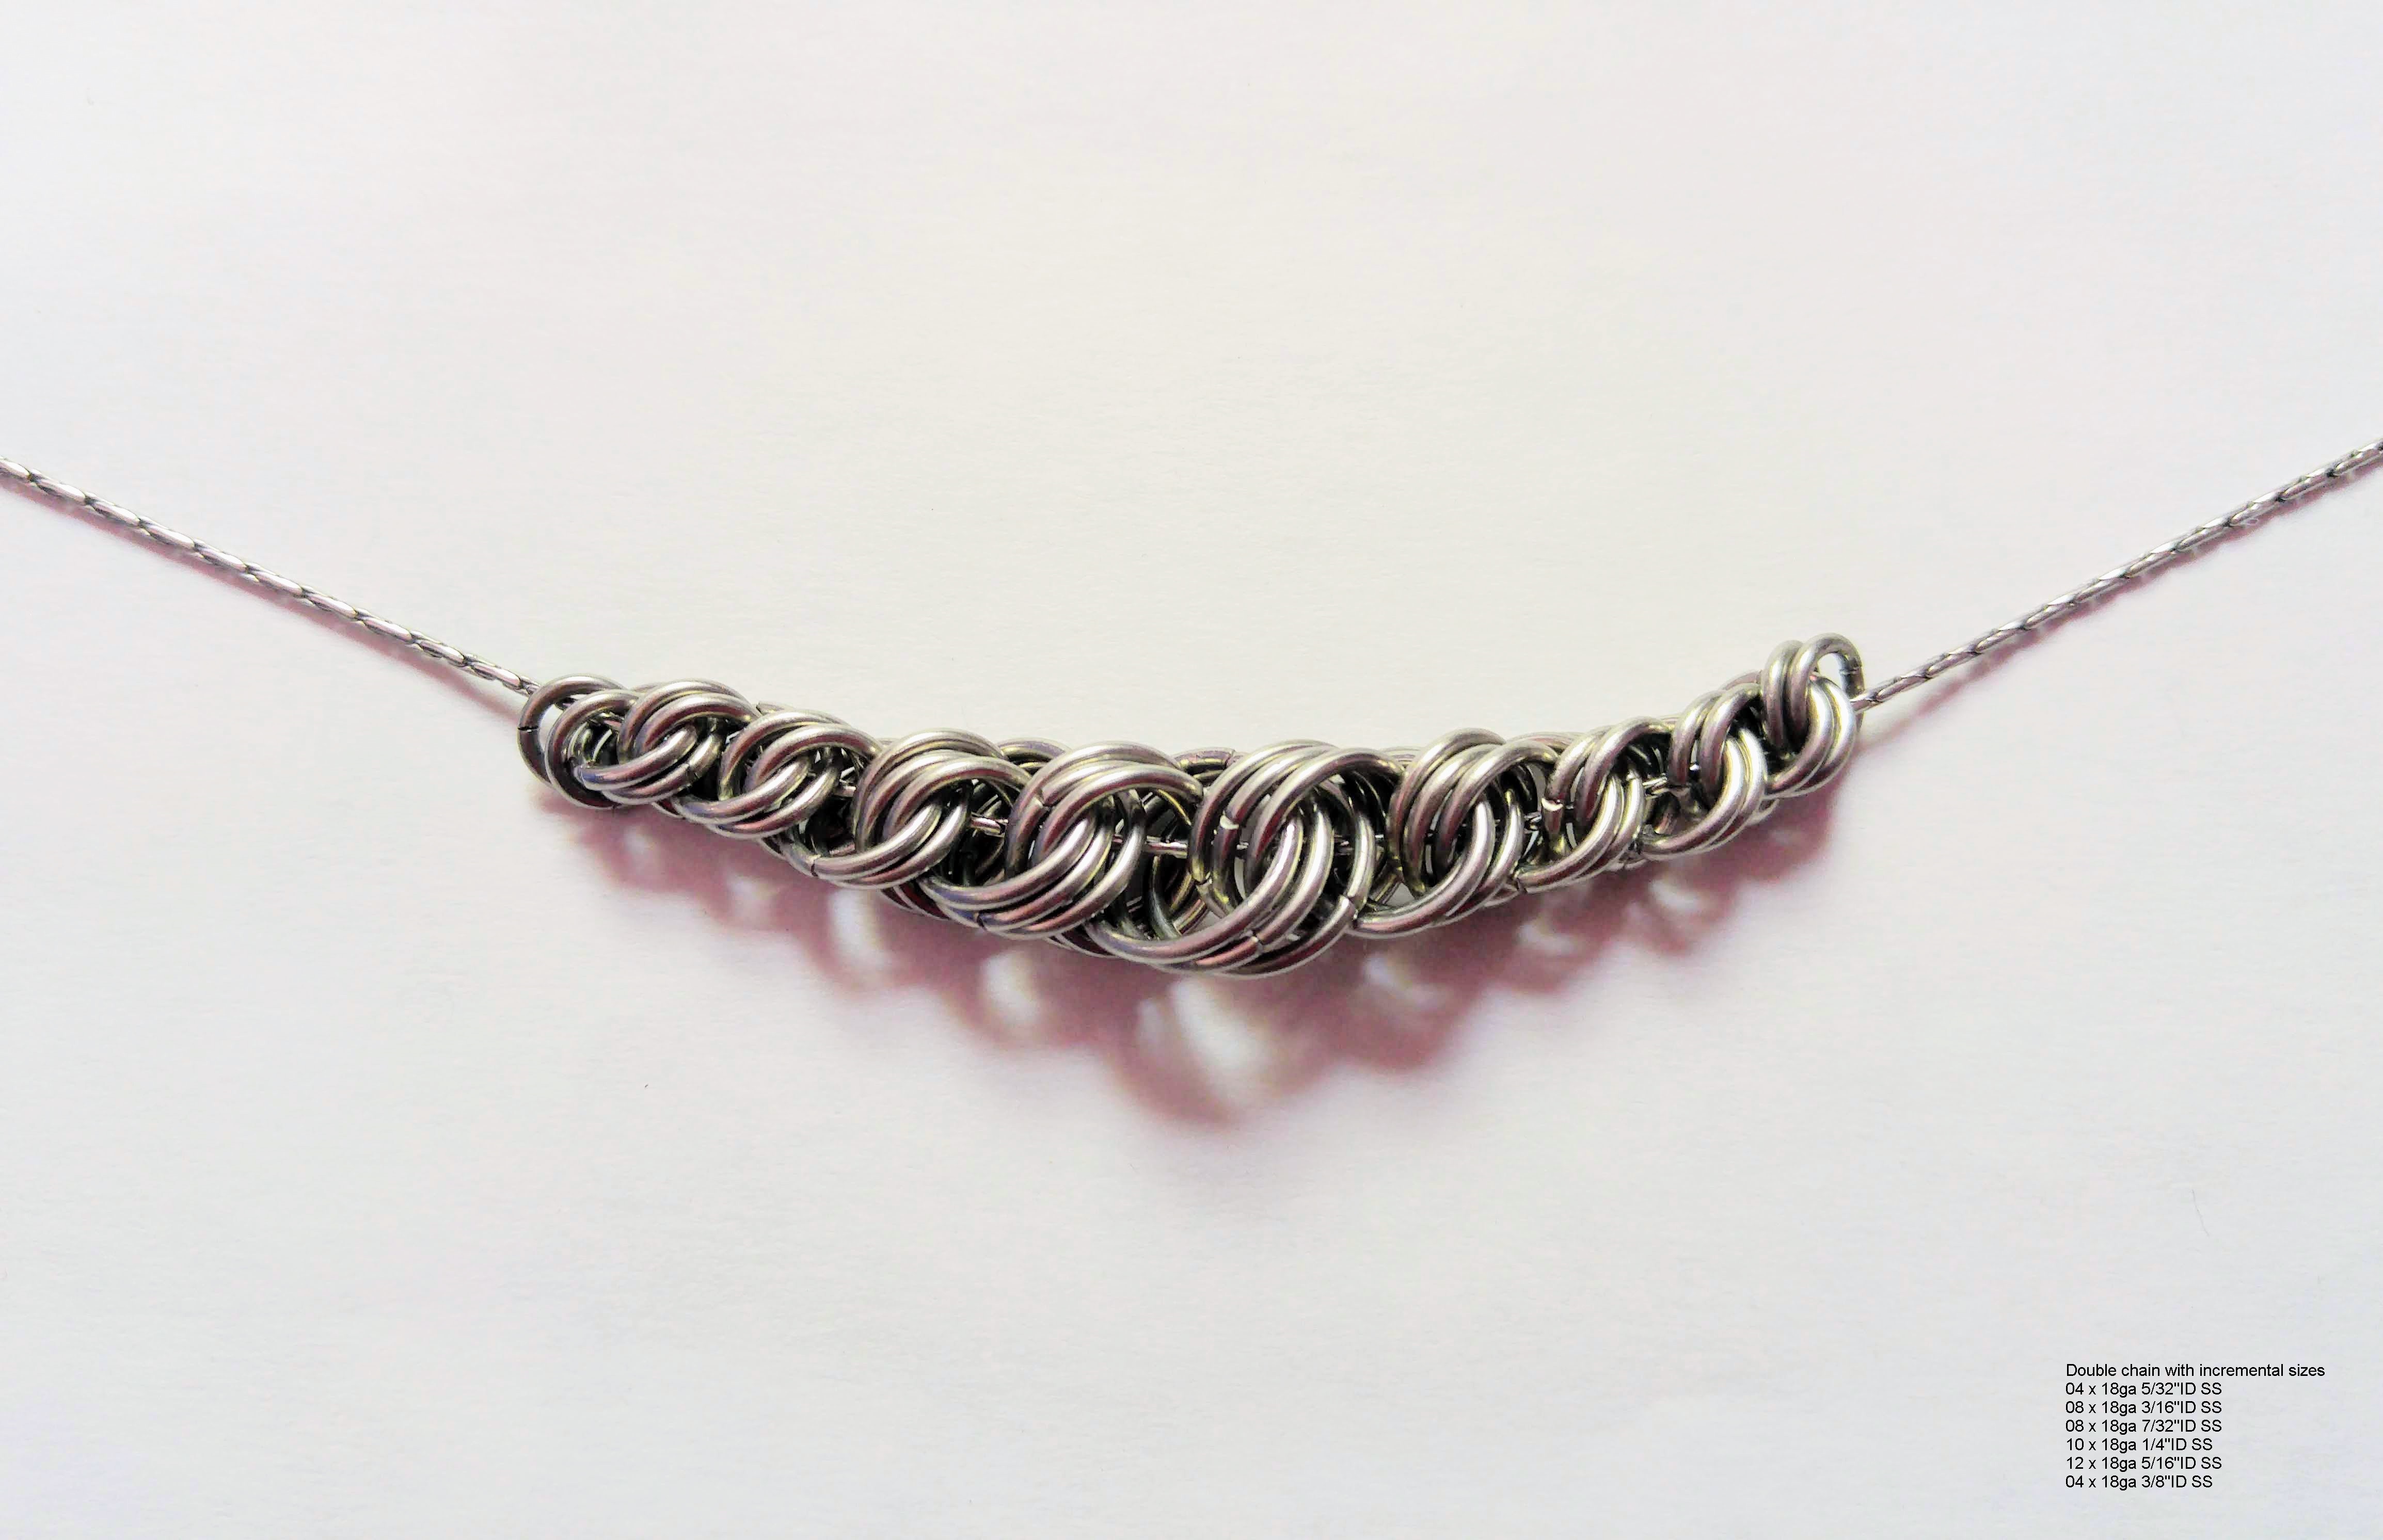 A necklace with the centerpiece being doubles and triplets of gradually growing rings, which then shrink down again on the other side.